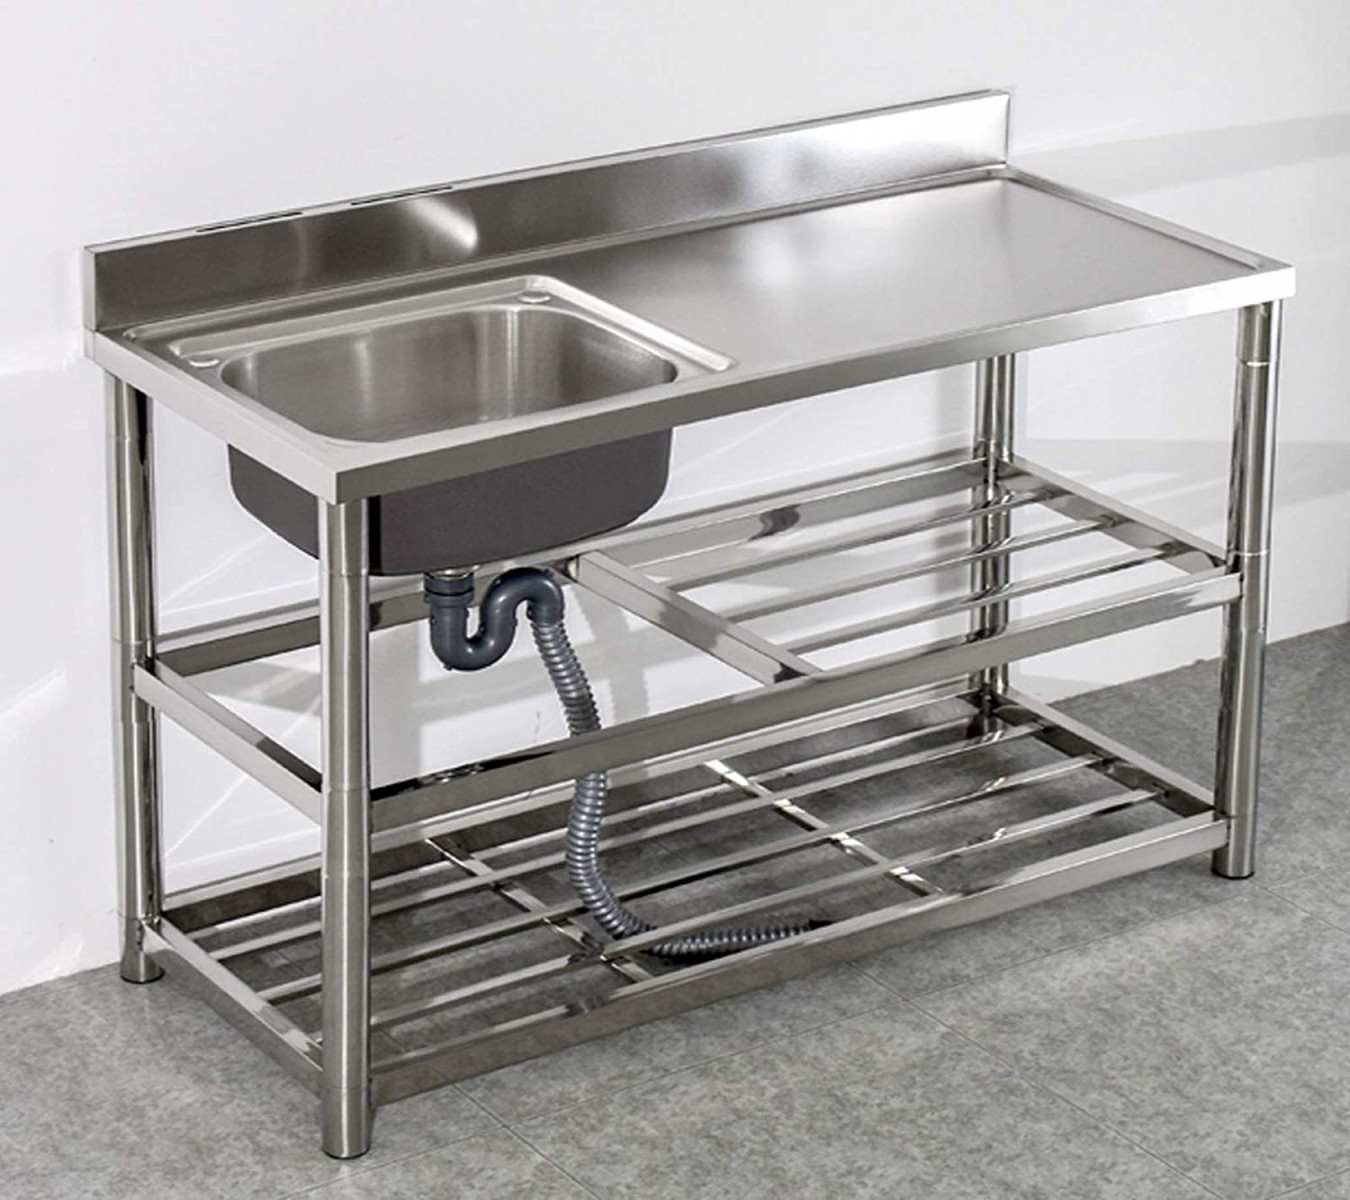 Kitchen sink with stand platform, stainless steel sink, worktop, integrated  catering, single sink, commercial sink for restaurants